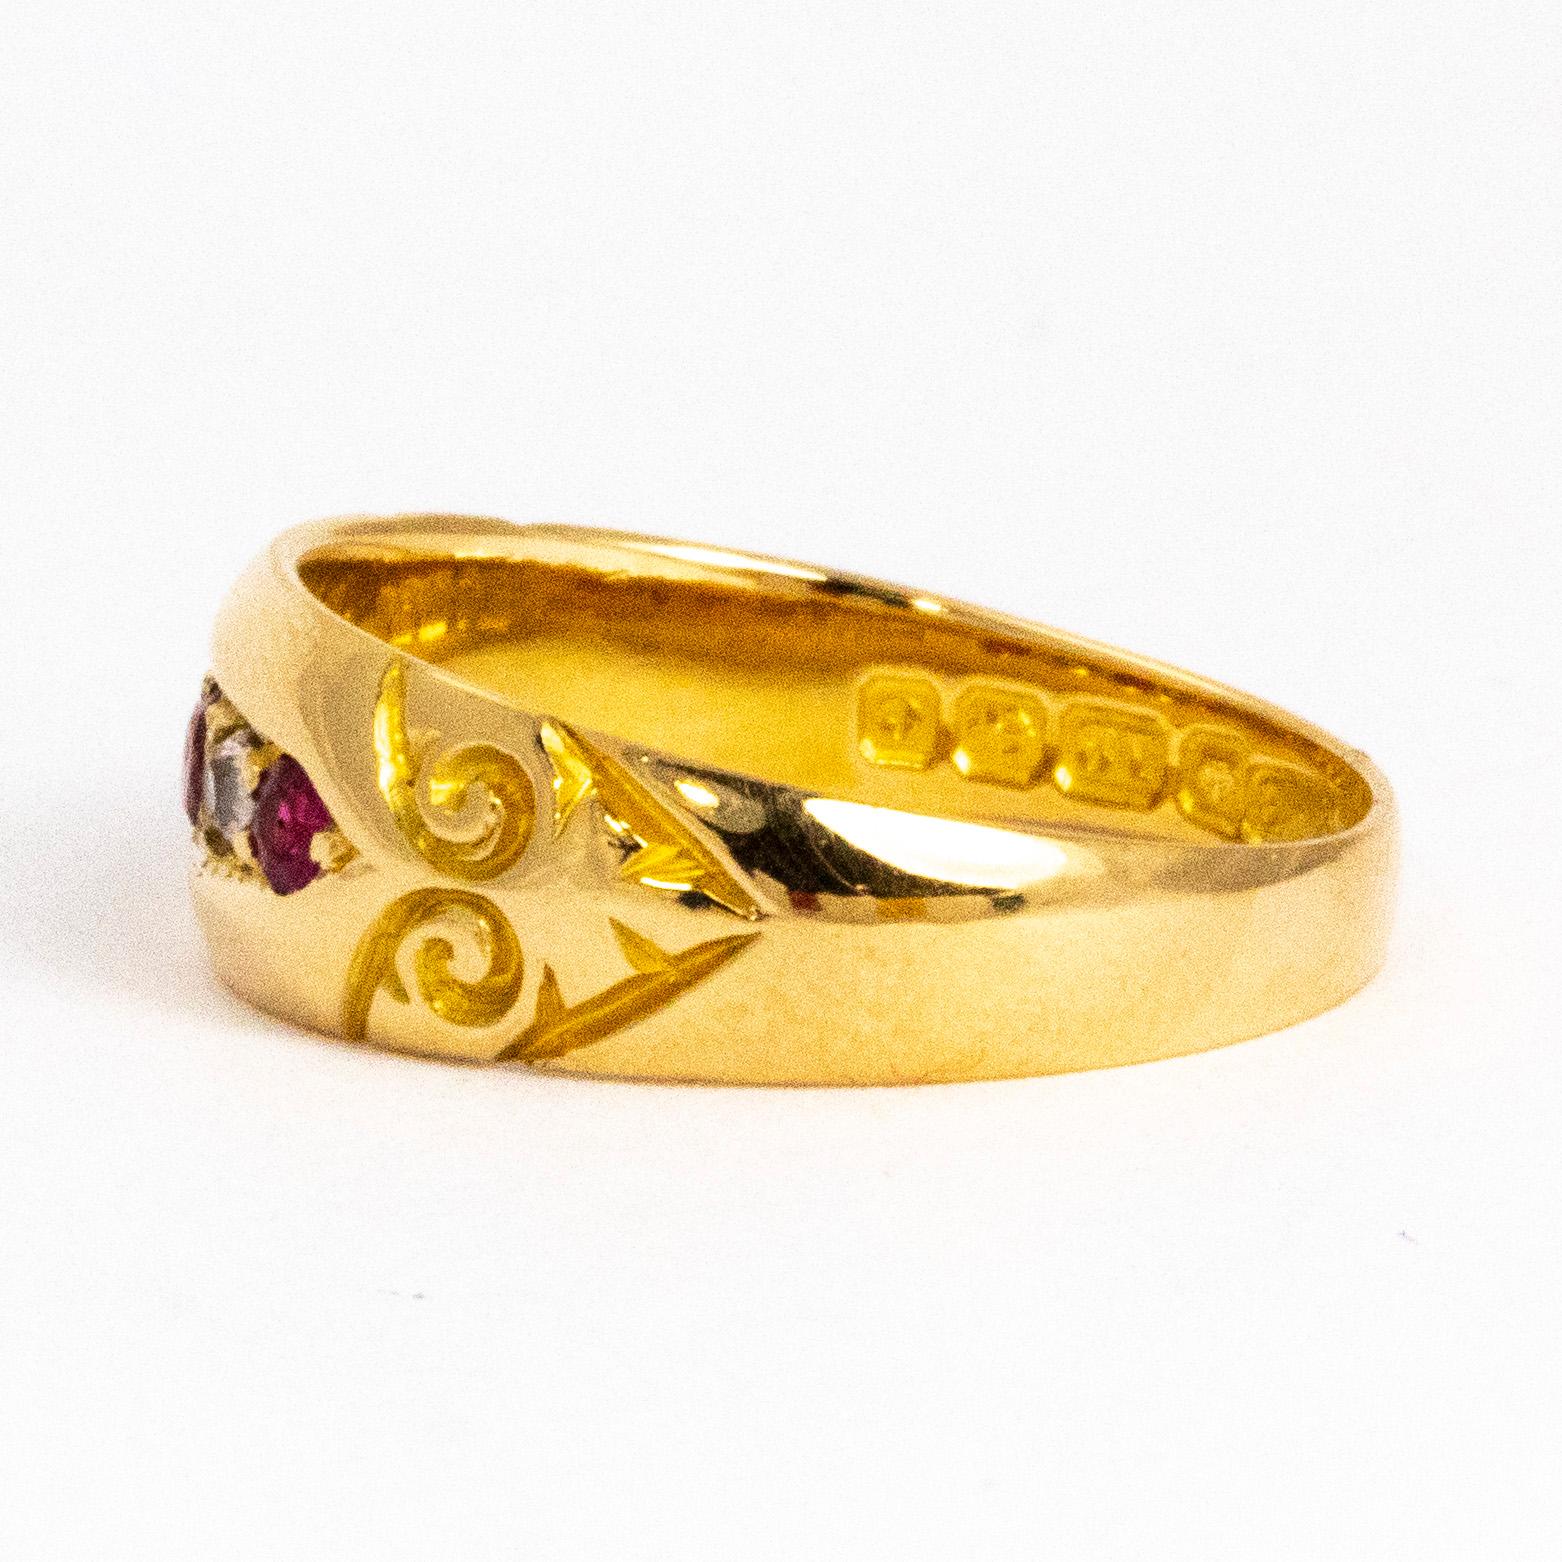 This 18ct gold band is packed with detail! The ring holds three deep pink rubies and two sparkling diamonds. The rubies total 17pts and the diamonds total 10pts. They are set flush in a boat shaped setting with scroll engraved detail either end. The